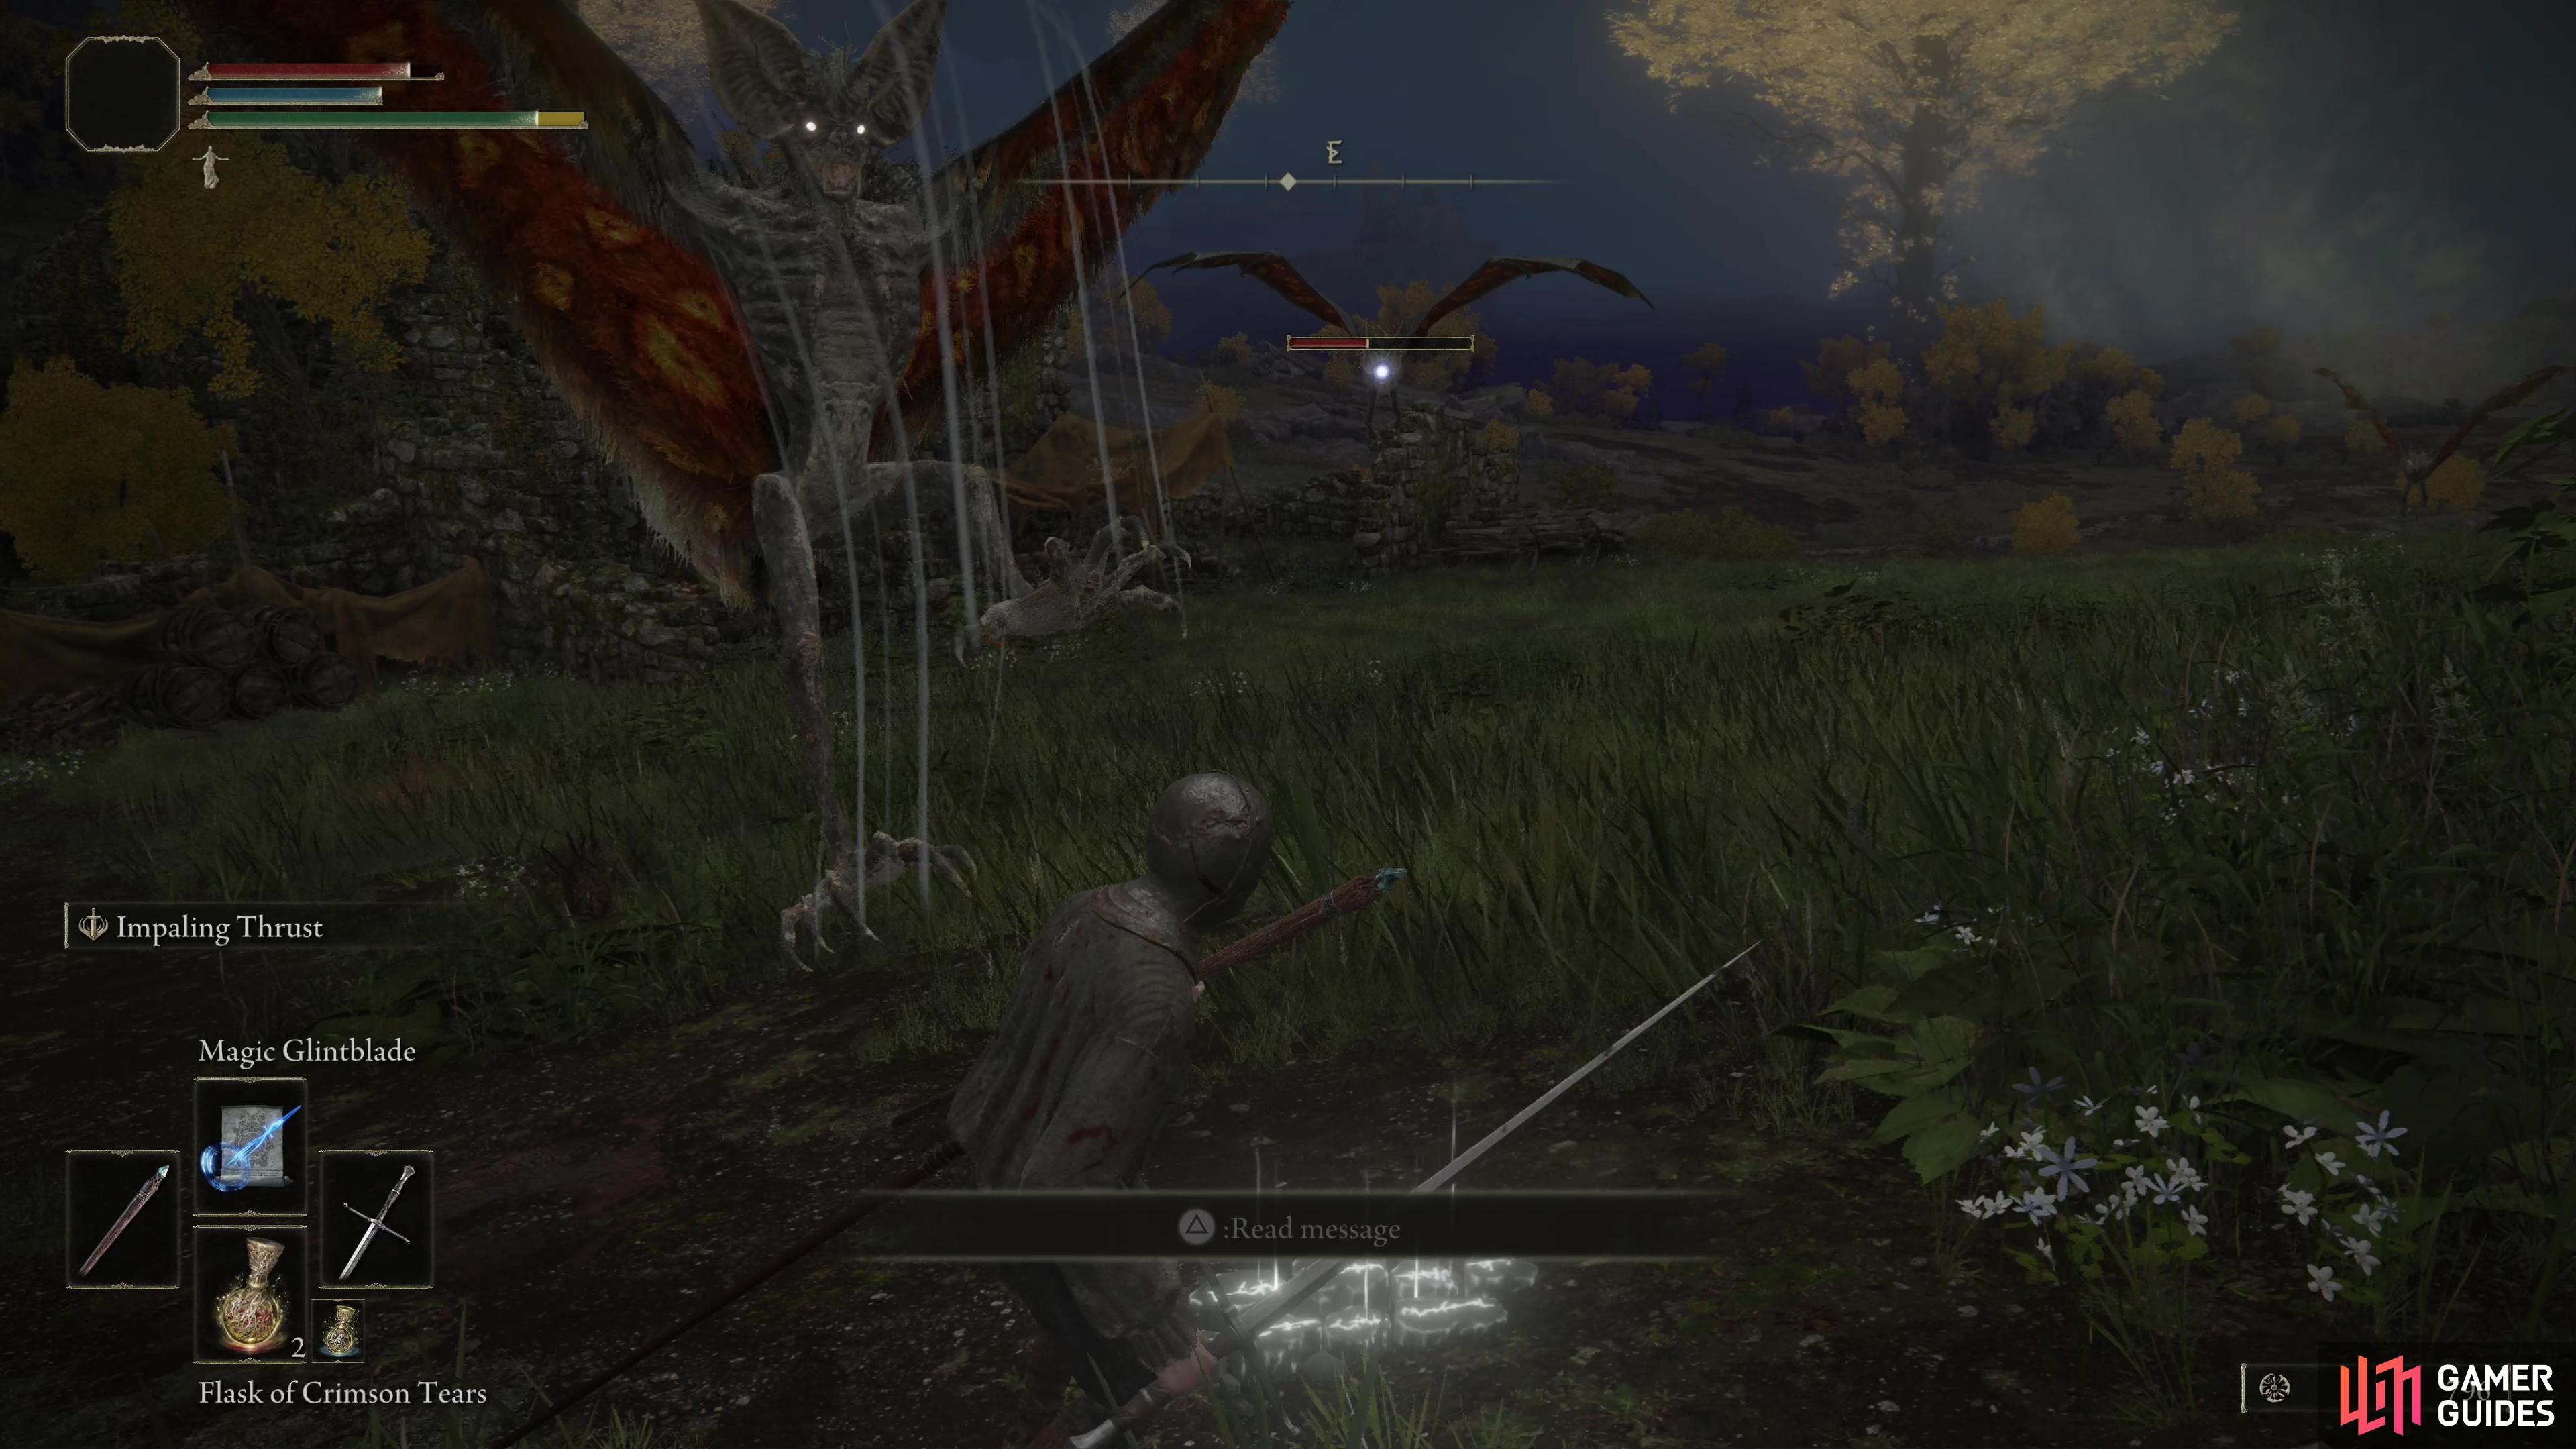 At night you can also find Giant Bats just outside the ruins.